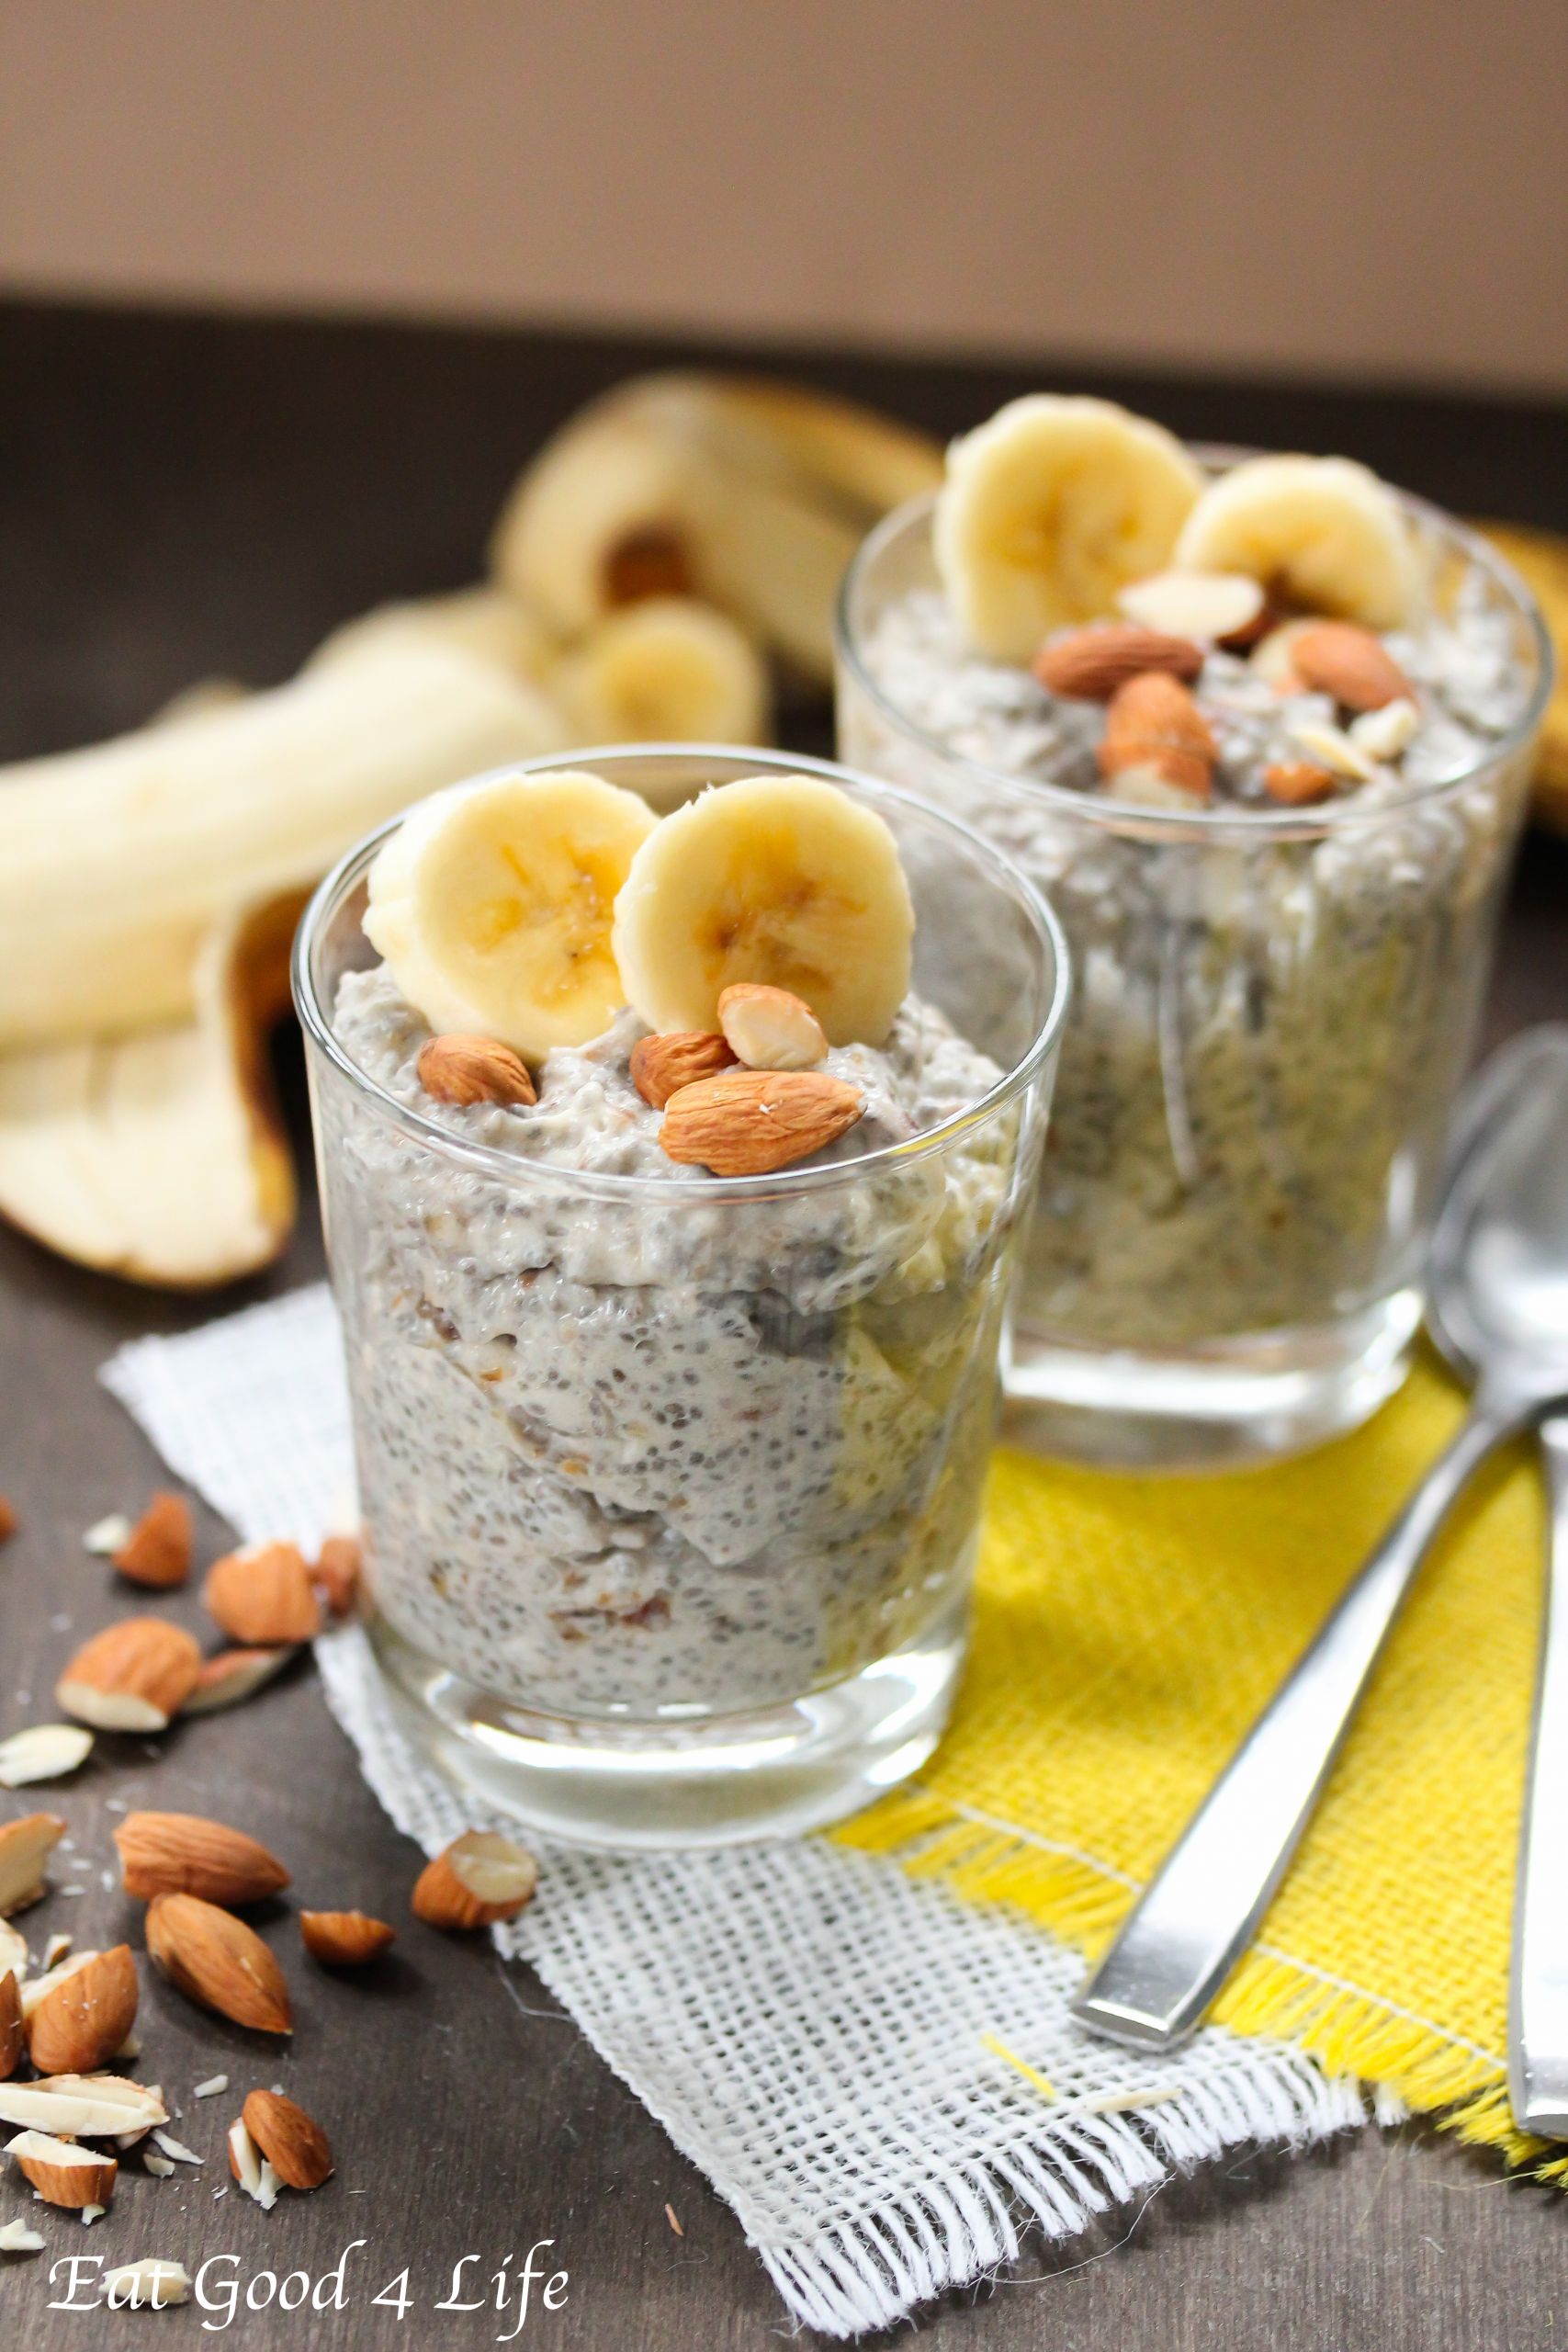 All Time Best Chia Seeds Breakfast Recipe Easy Recipes To Make At Home 